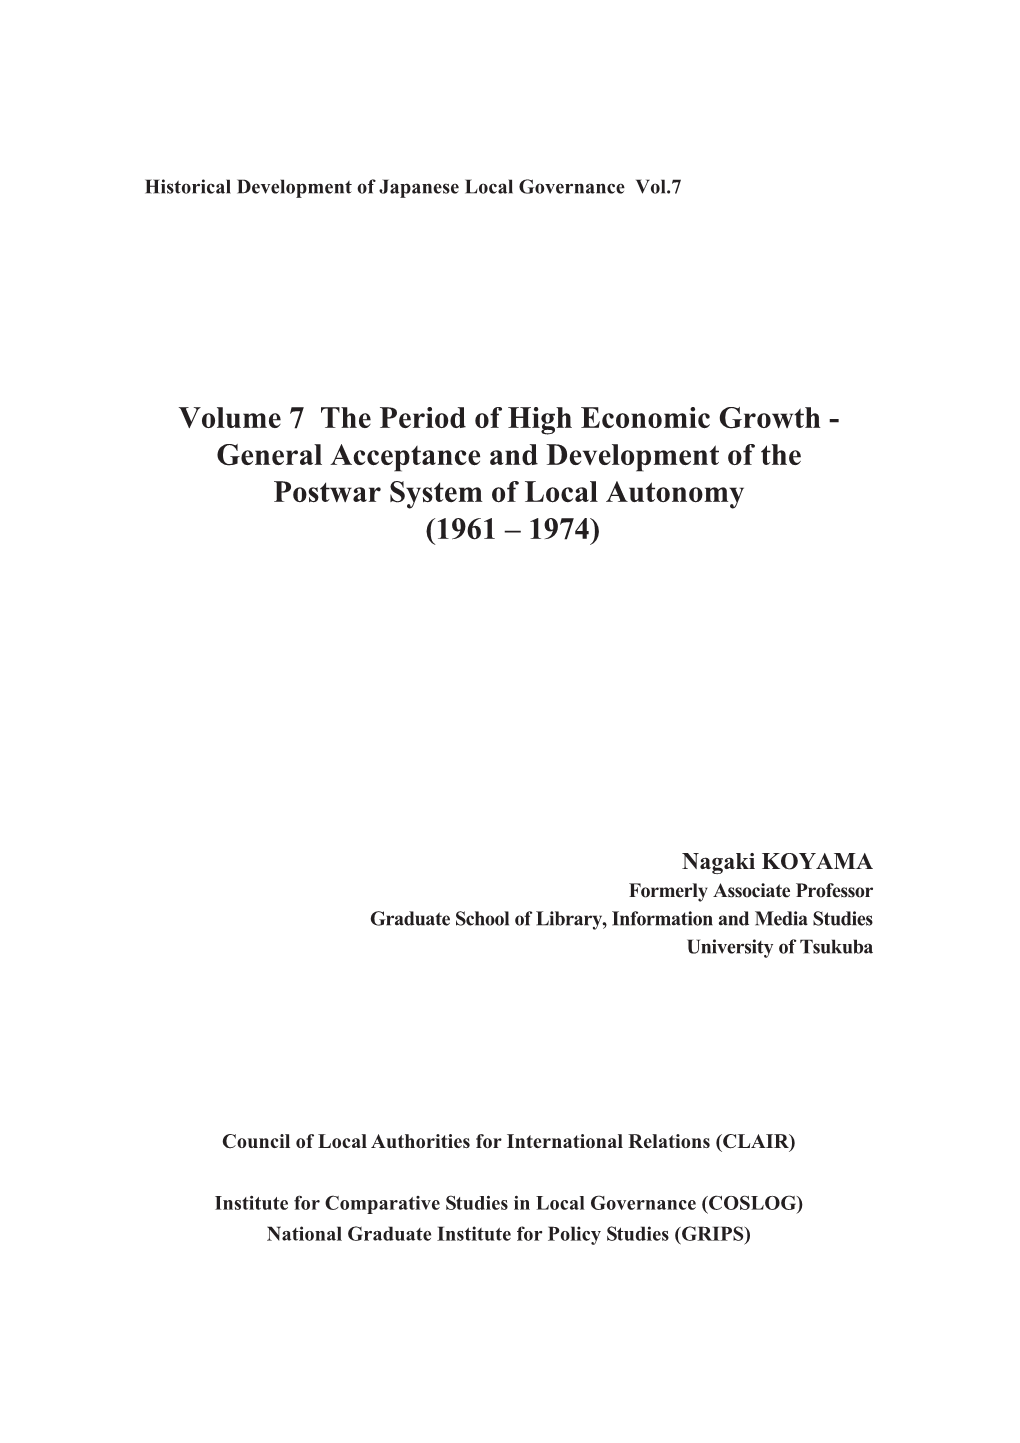 Volume 7 the Period of High Economic Growth - General Acceptance and Development of the Postwar System of Local Autonomy (1961 – 1974)